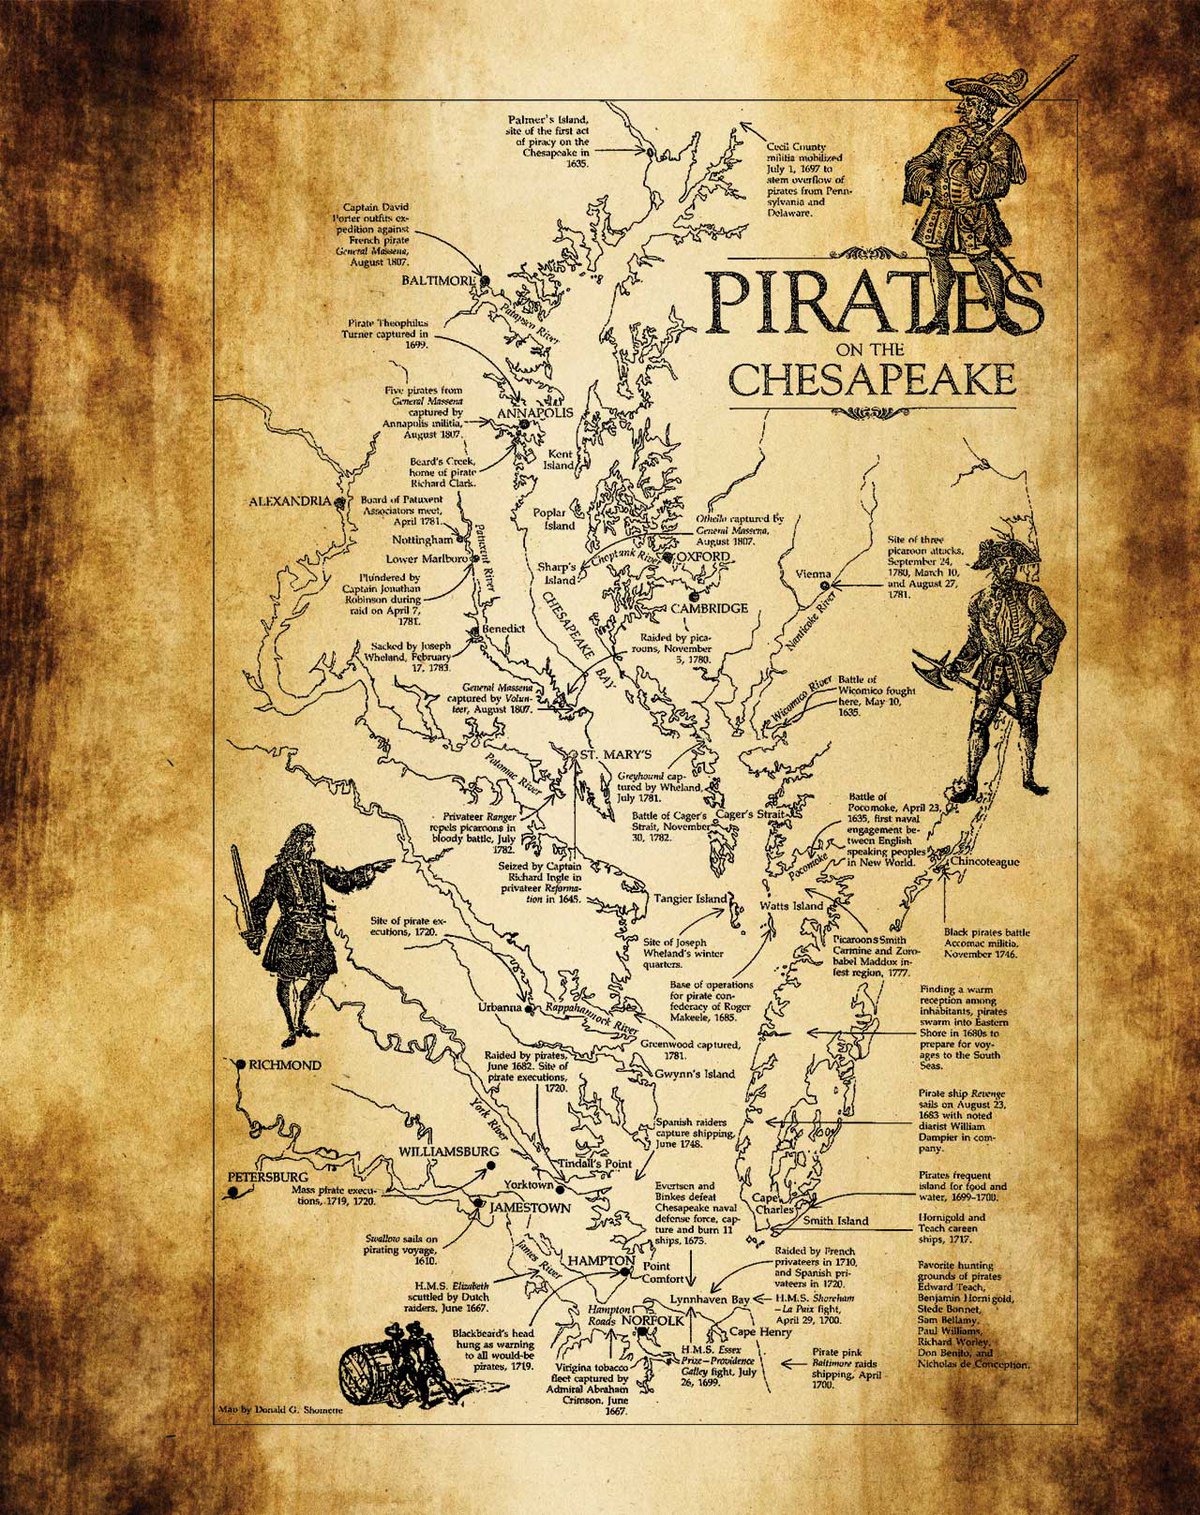 Last Pirates map - every location marked